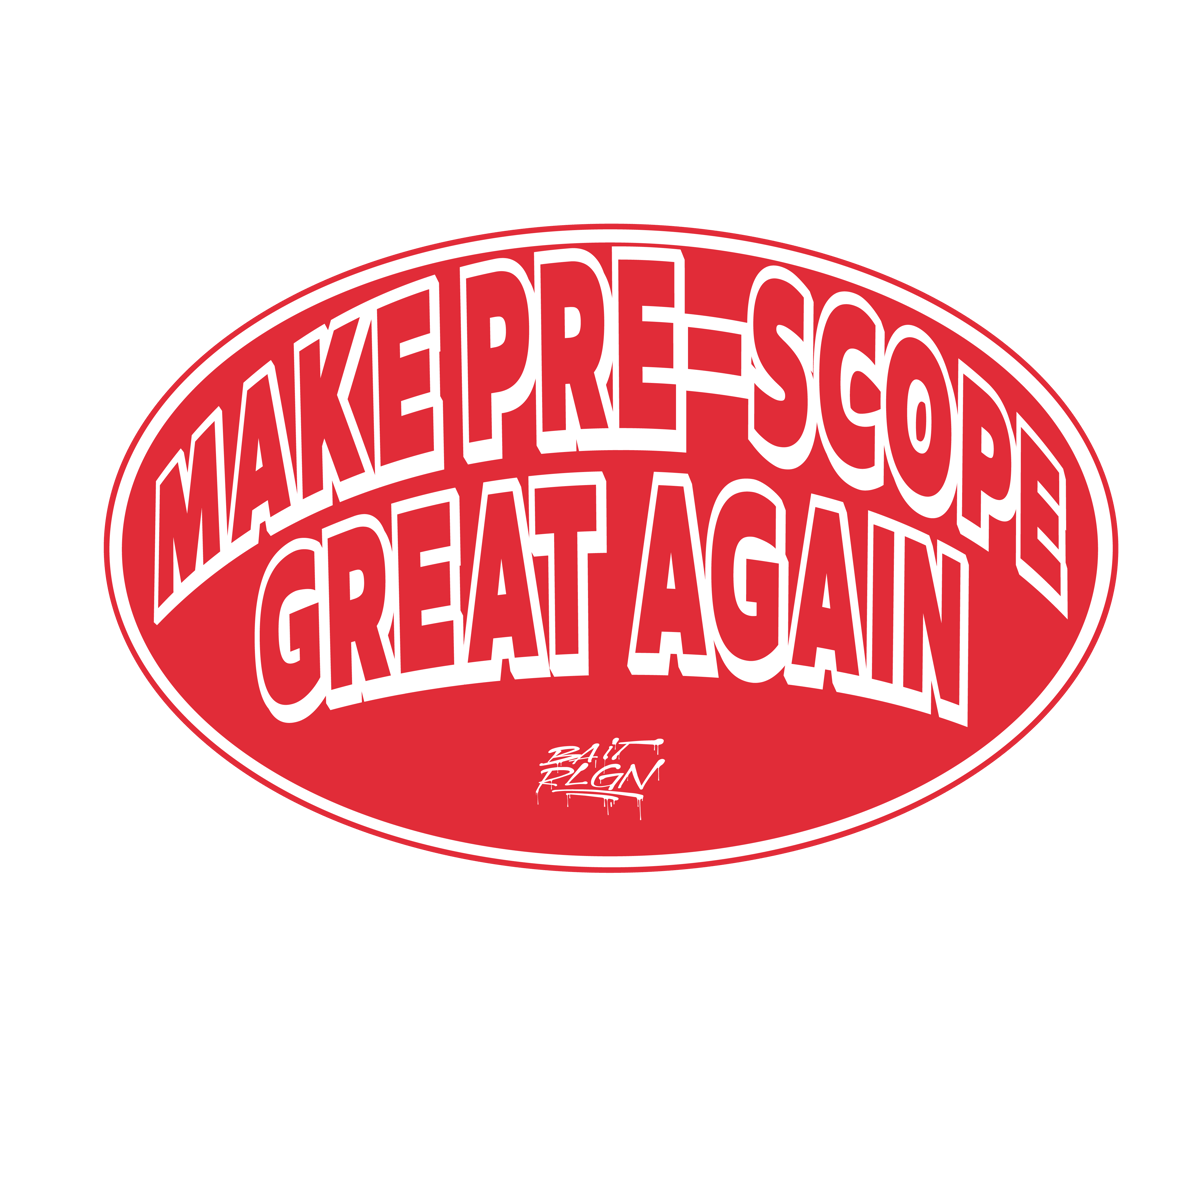 Image of MAKE PRE-SCOPE GREAT AGAIN T-SHIRT